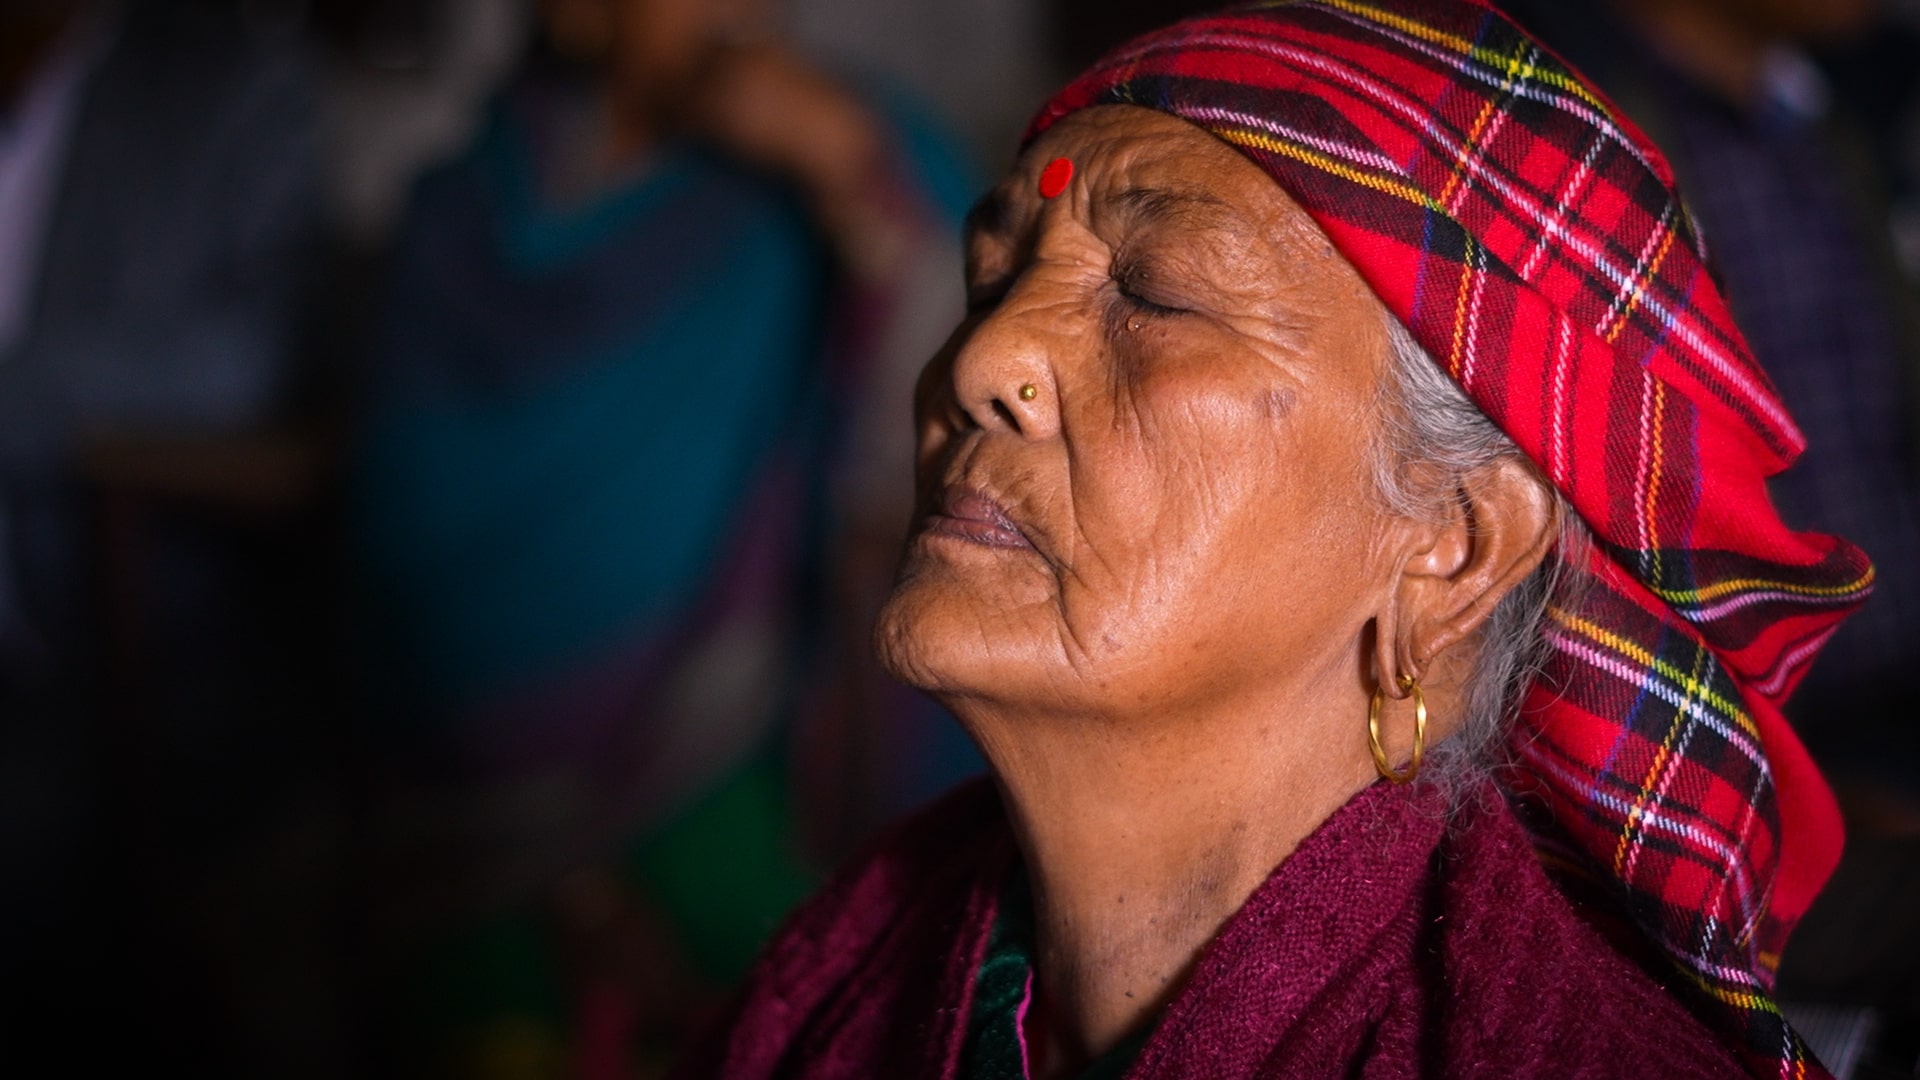 Cataract Blindness Alleviation Project in priority areas of all provinces of Nepal